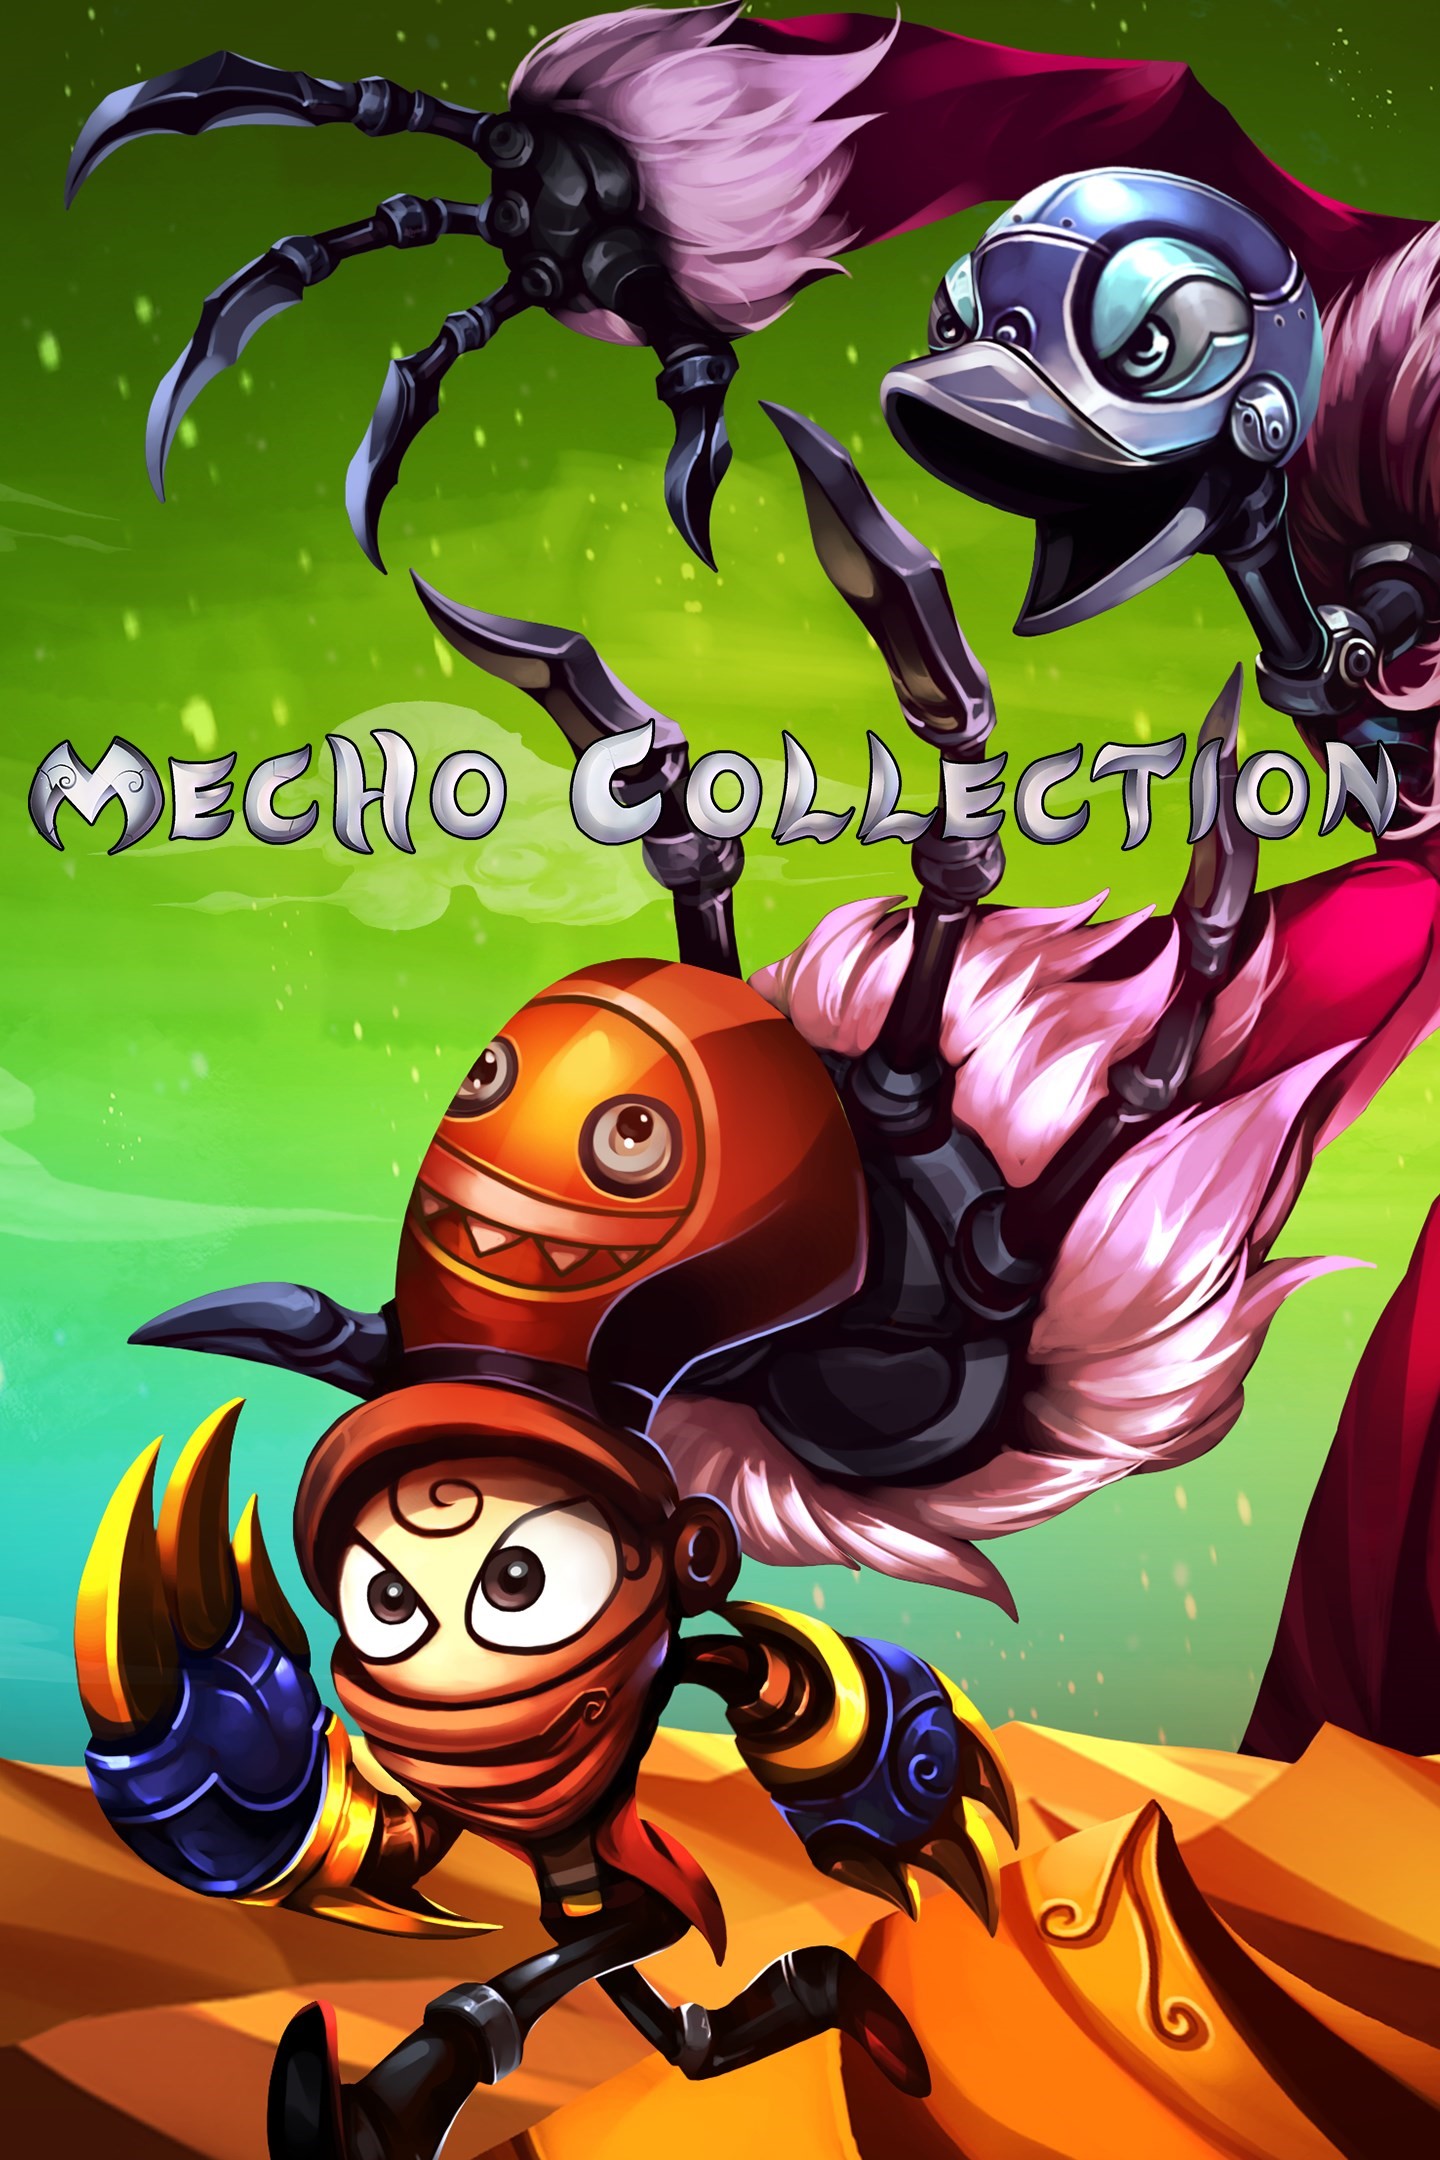 Mecho Collection